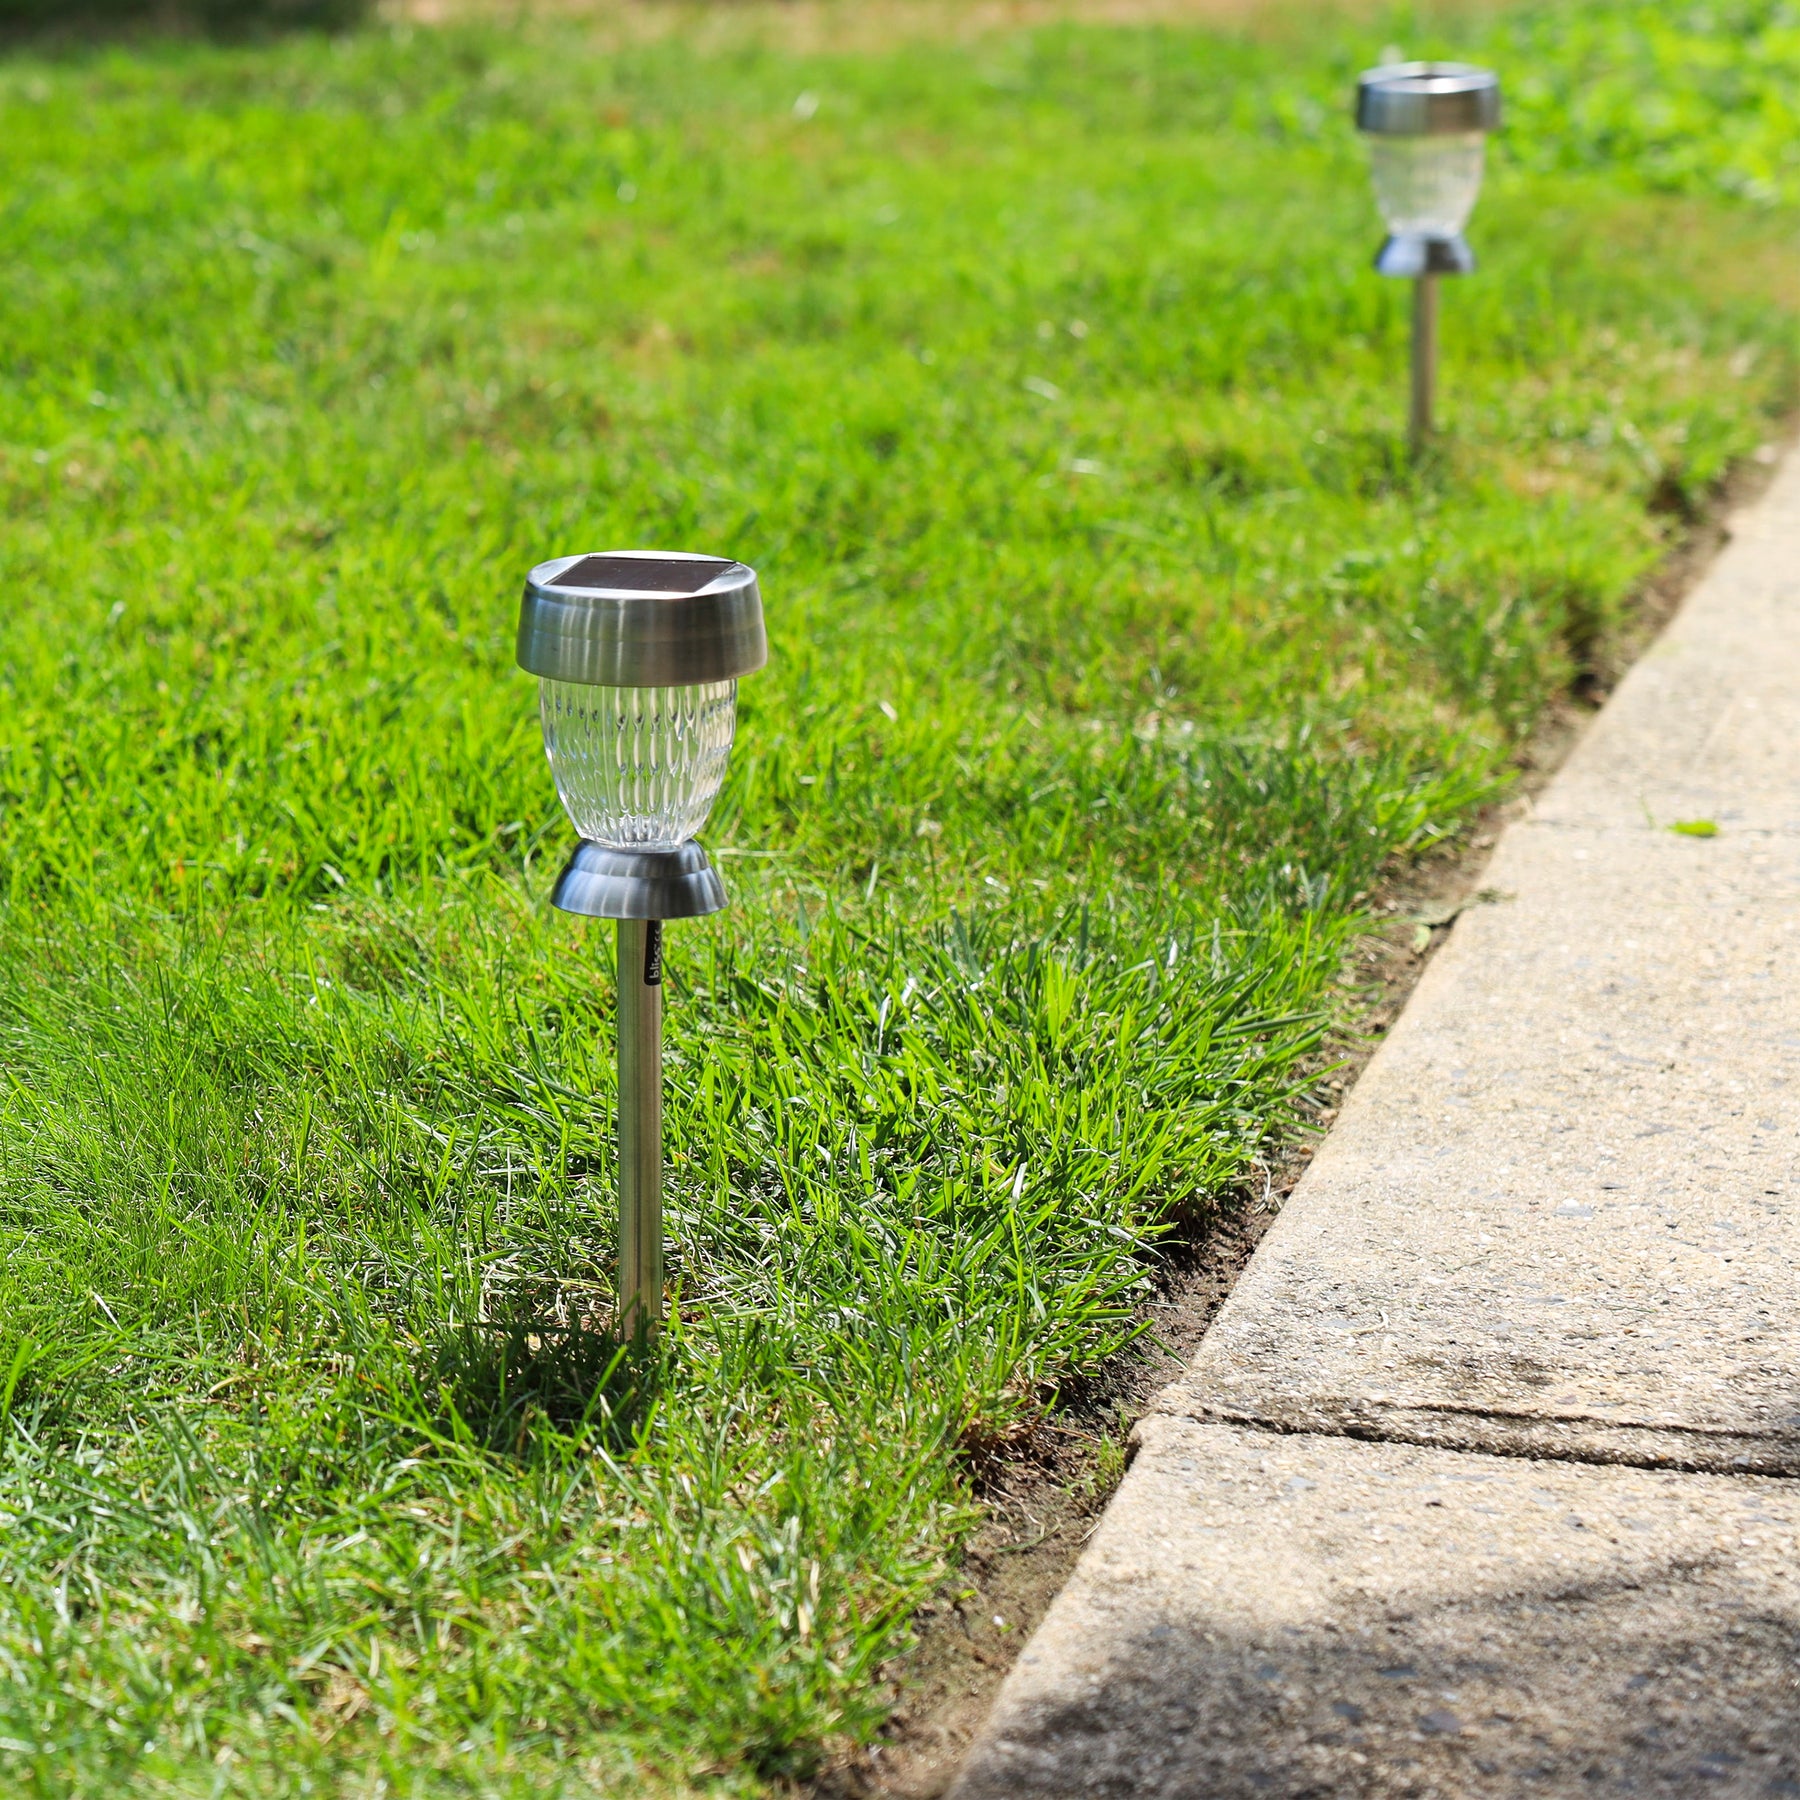 14-inch solar powered LED lights staked in the ground along the side of a pathway.